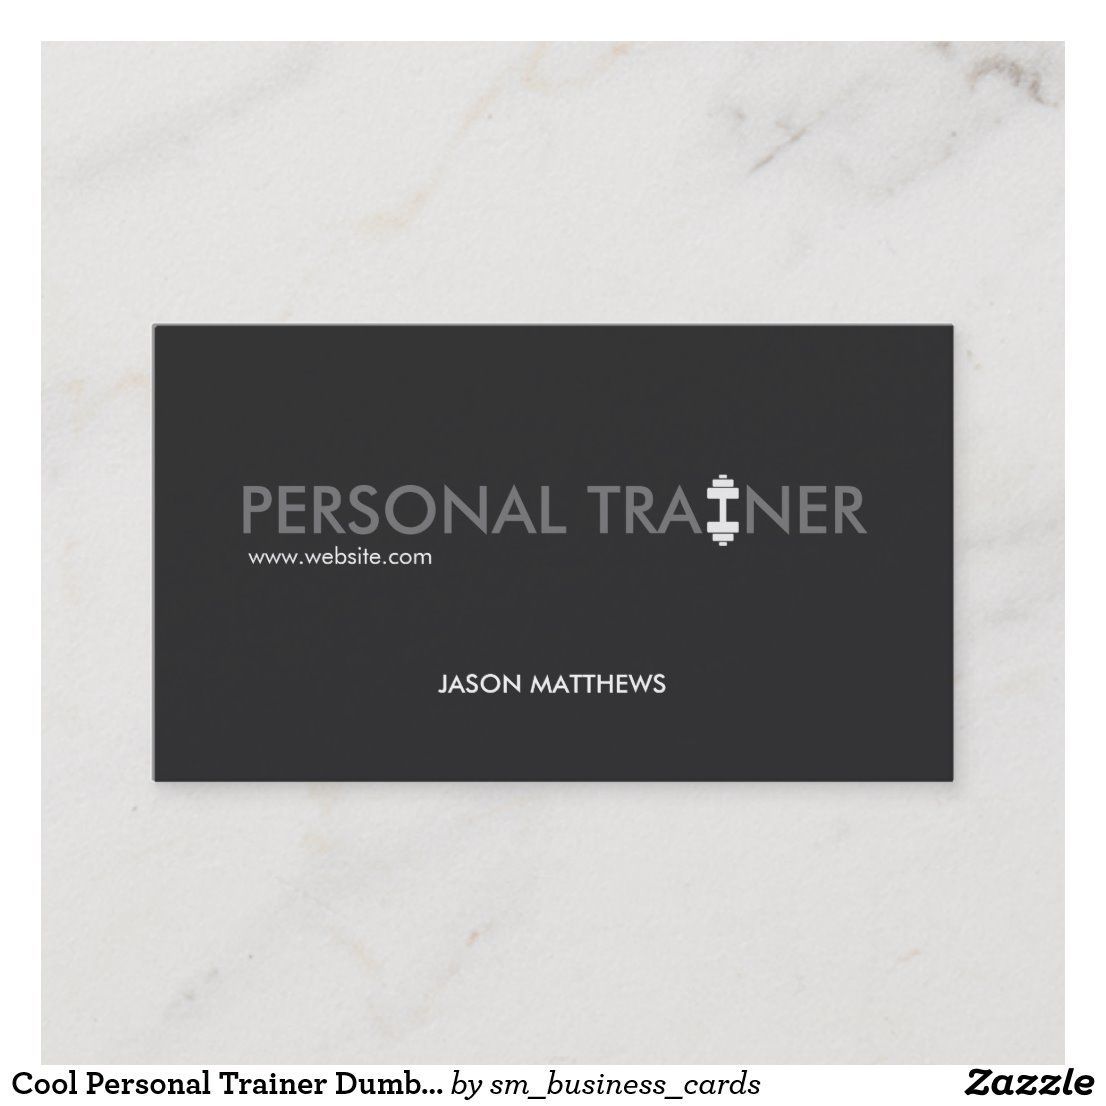 Cool Personal Trainer Dumbbell Logo Fitness Business Card - Cool Personal Trainer Dumbbell Logo Fitness Business Card -   19 moda fitness Logo ideas